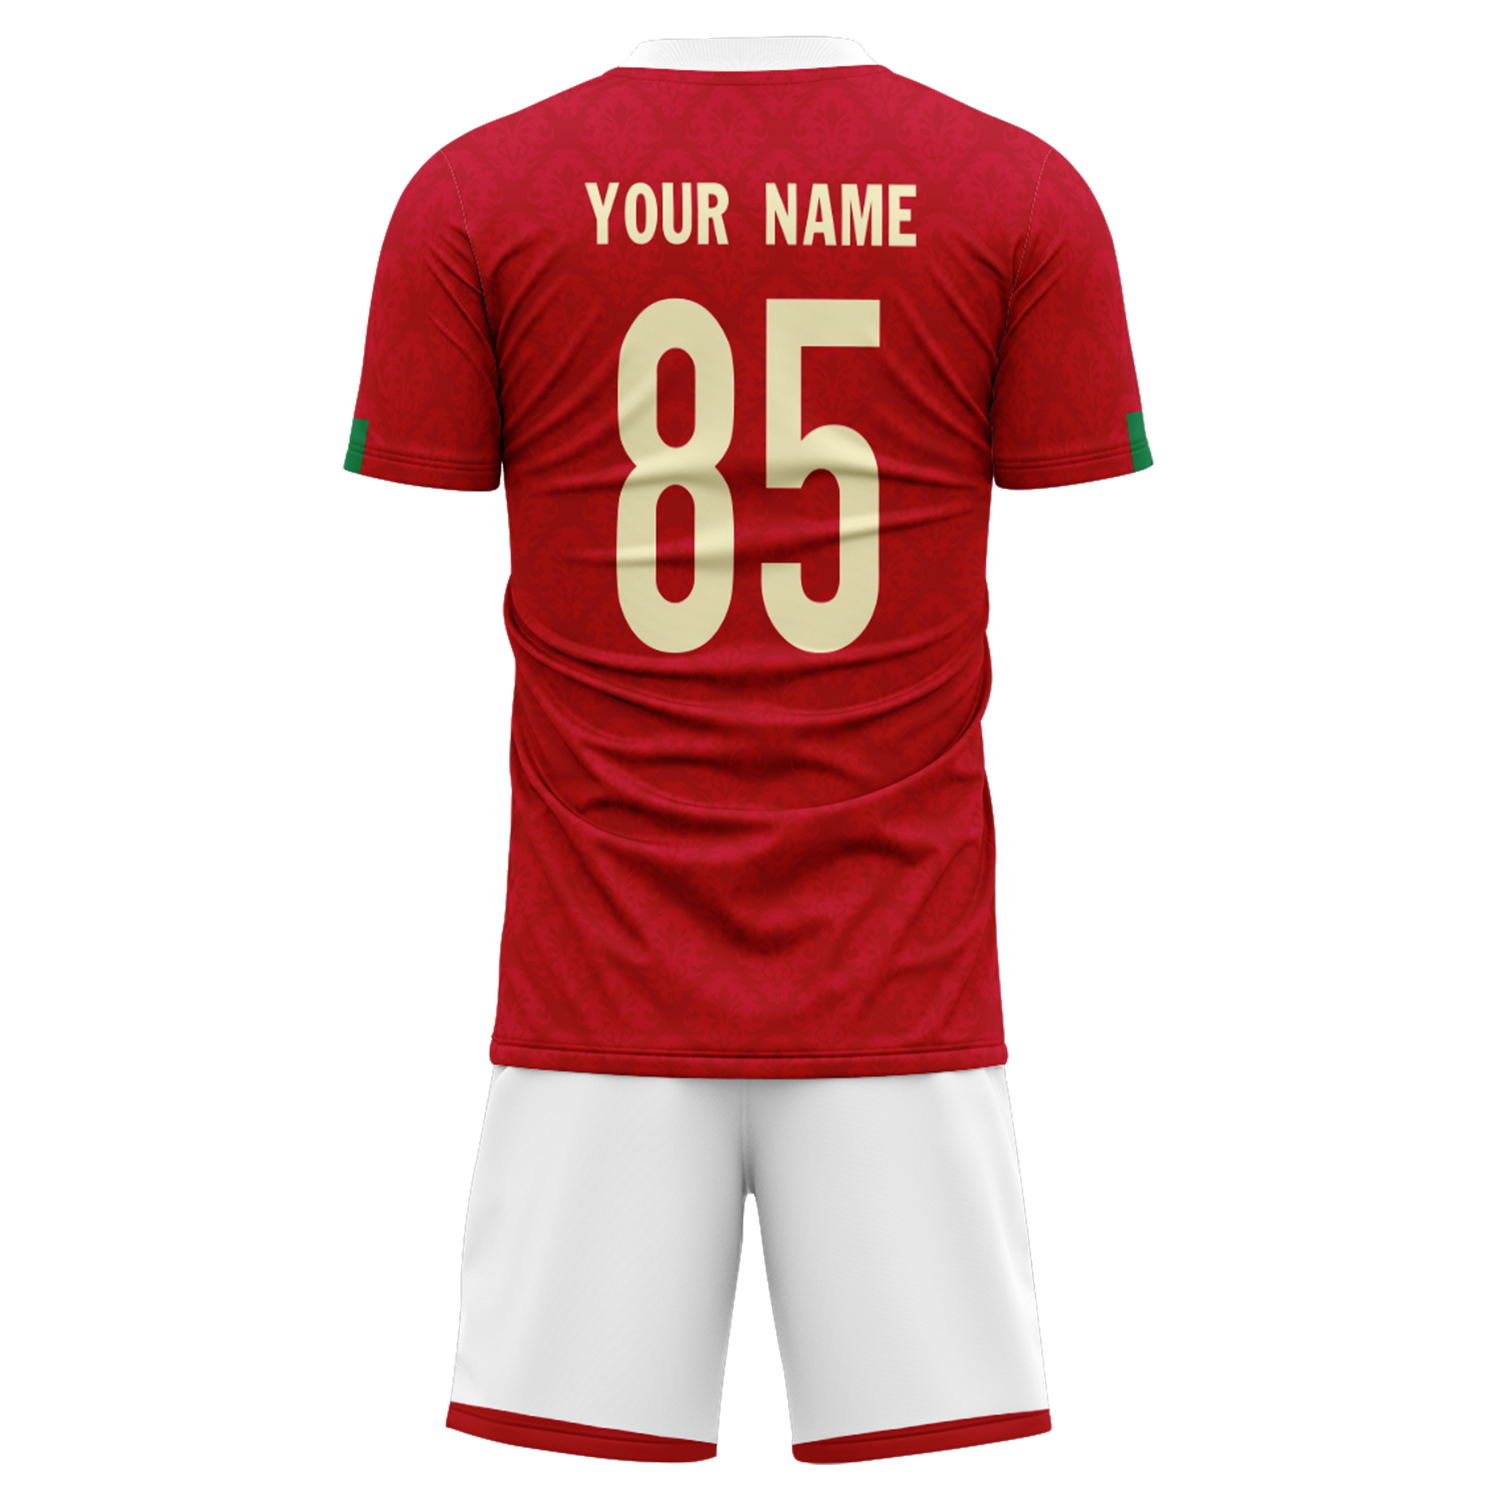 Custom Welsh Team Football Suits Personalized Design Print on Demand Soccer Jerseys